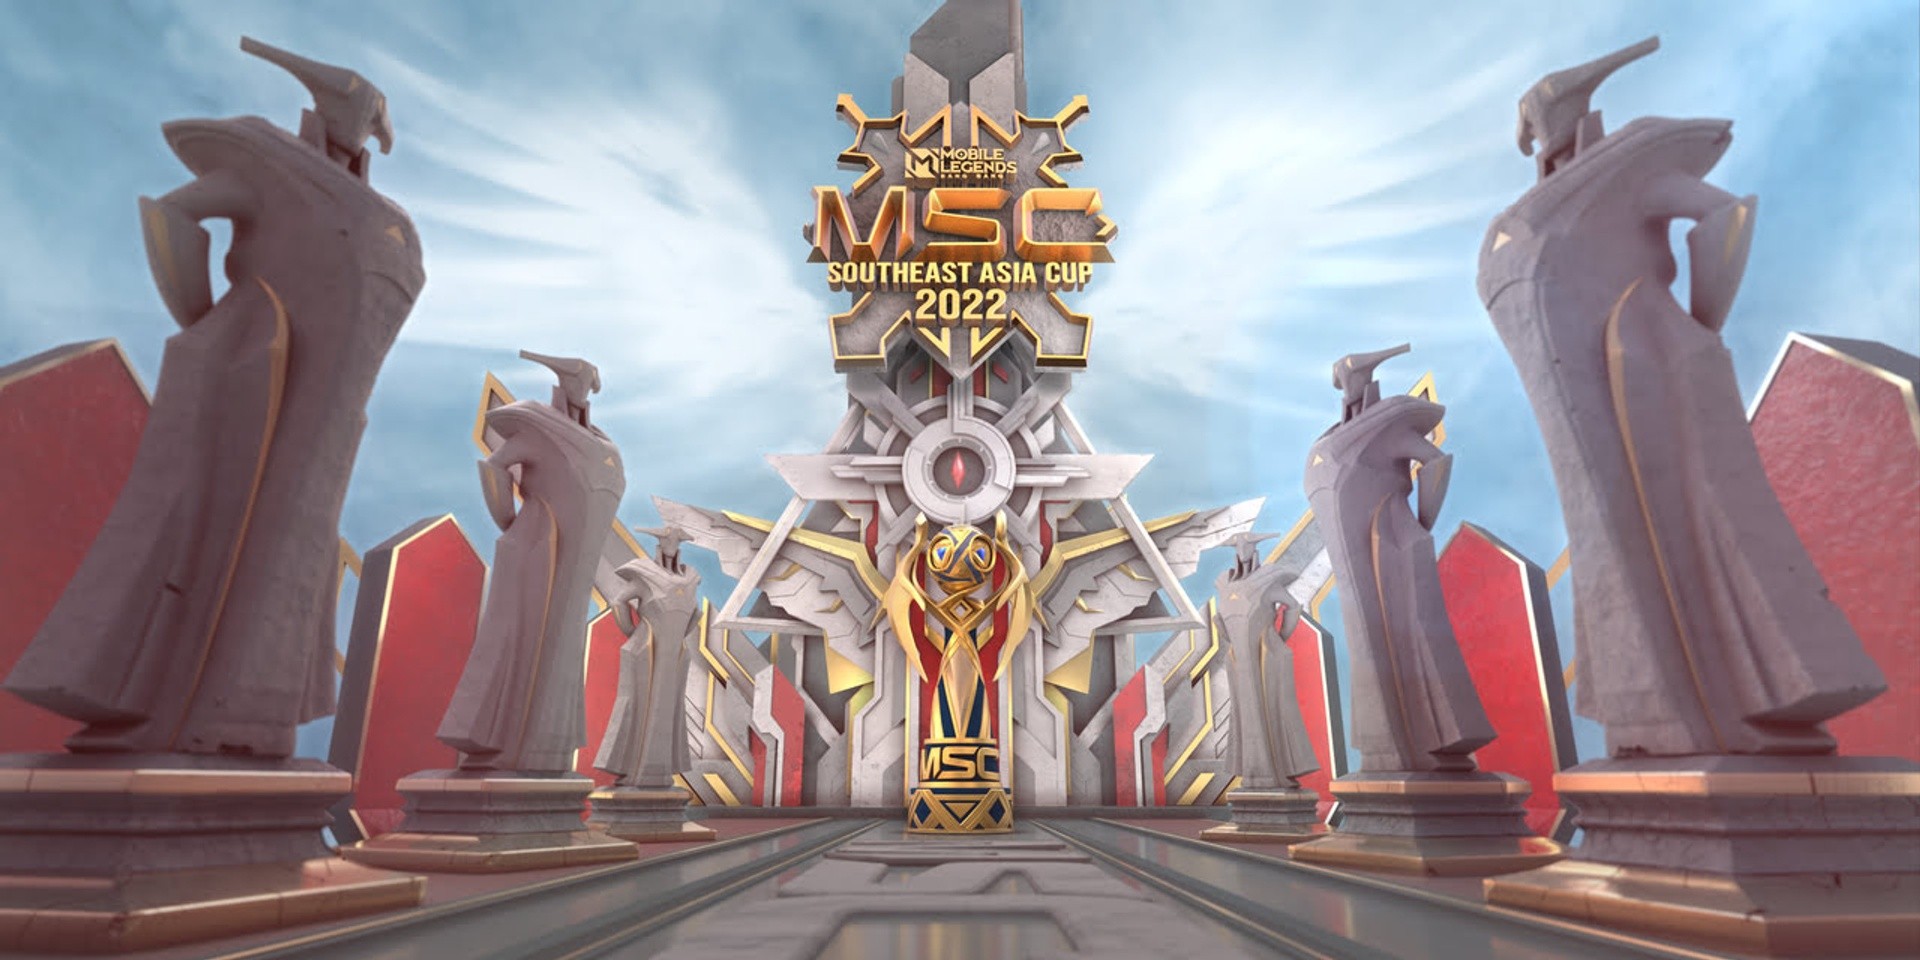 Mobile Legends: Bang Bang Southeast Asia Cup 2022 to be held in Kuala Lumpur this June